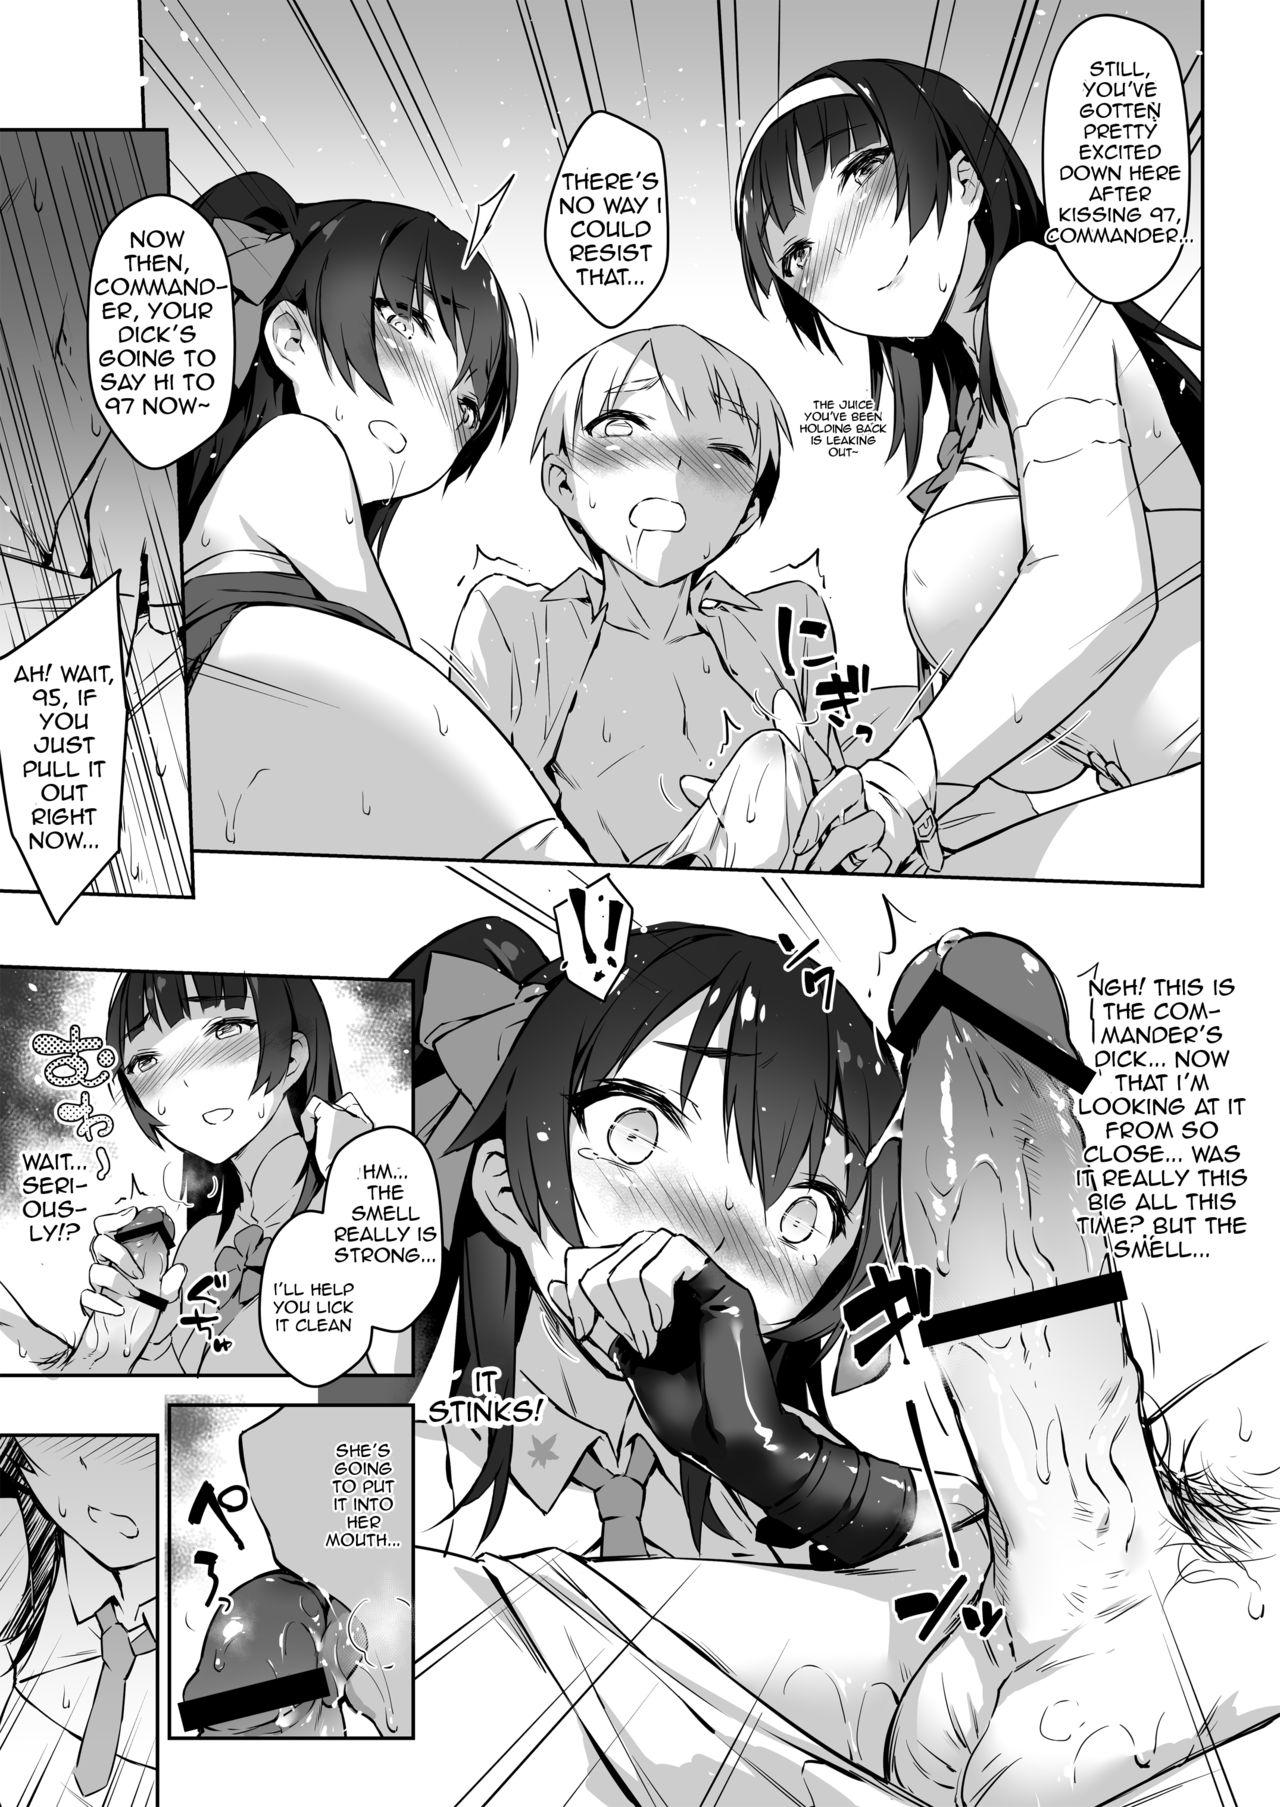 Cums Type 95 Type 97, Let Your Big Sister Teach You! - Girls frontline For - Page 11